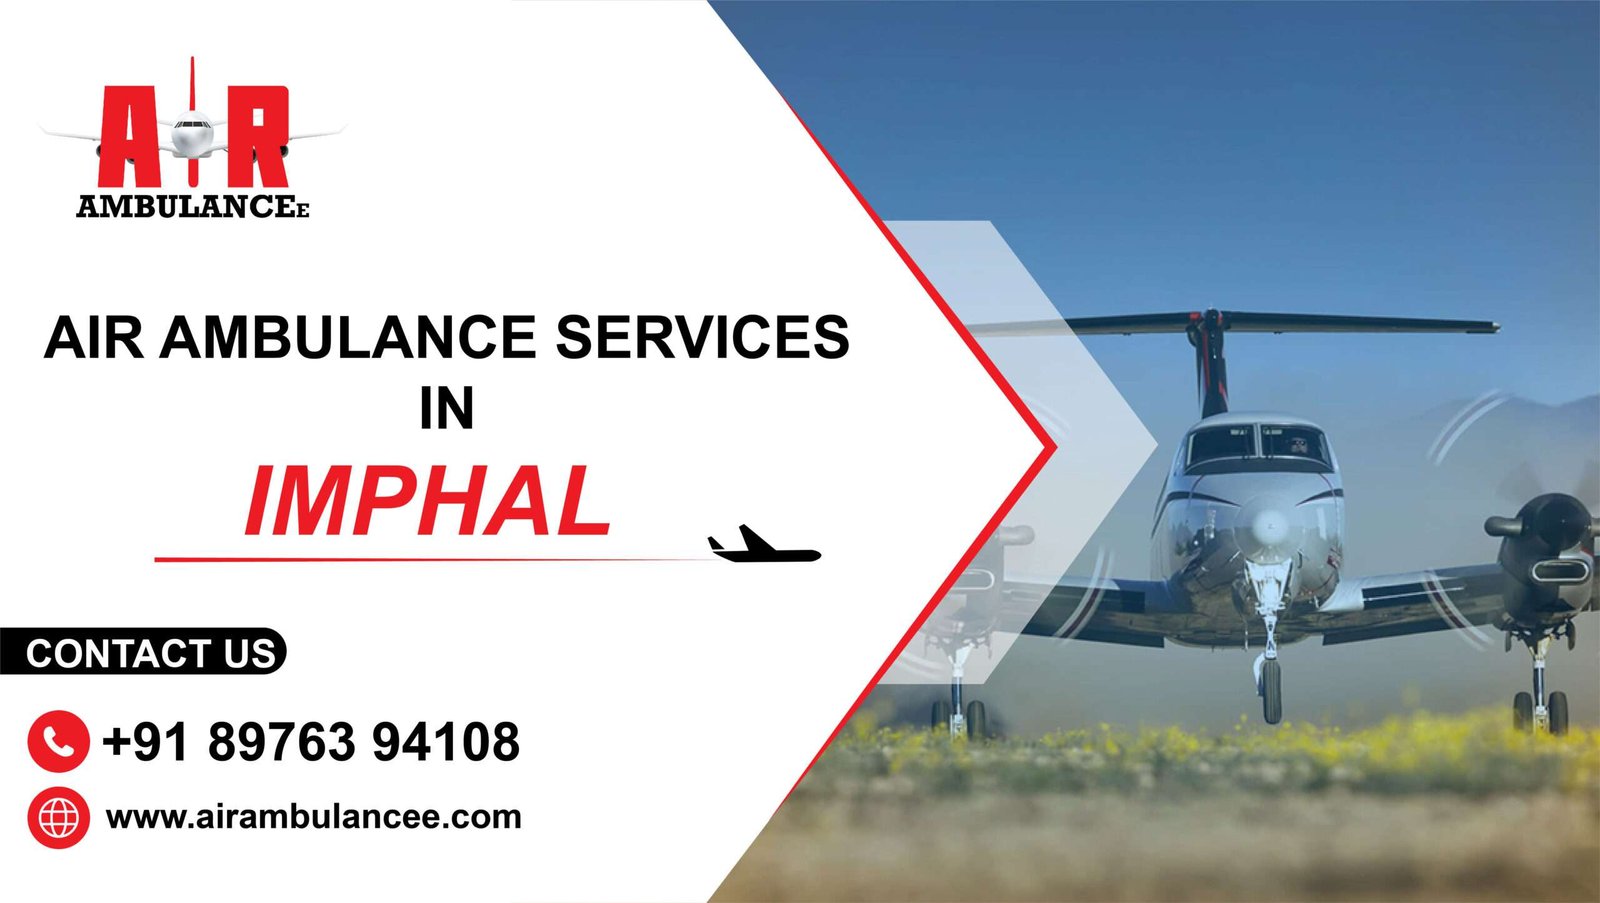 Air Ambulance Services In Imphal